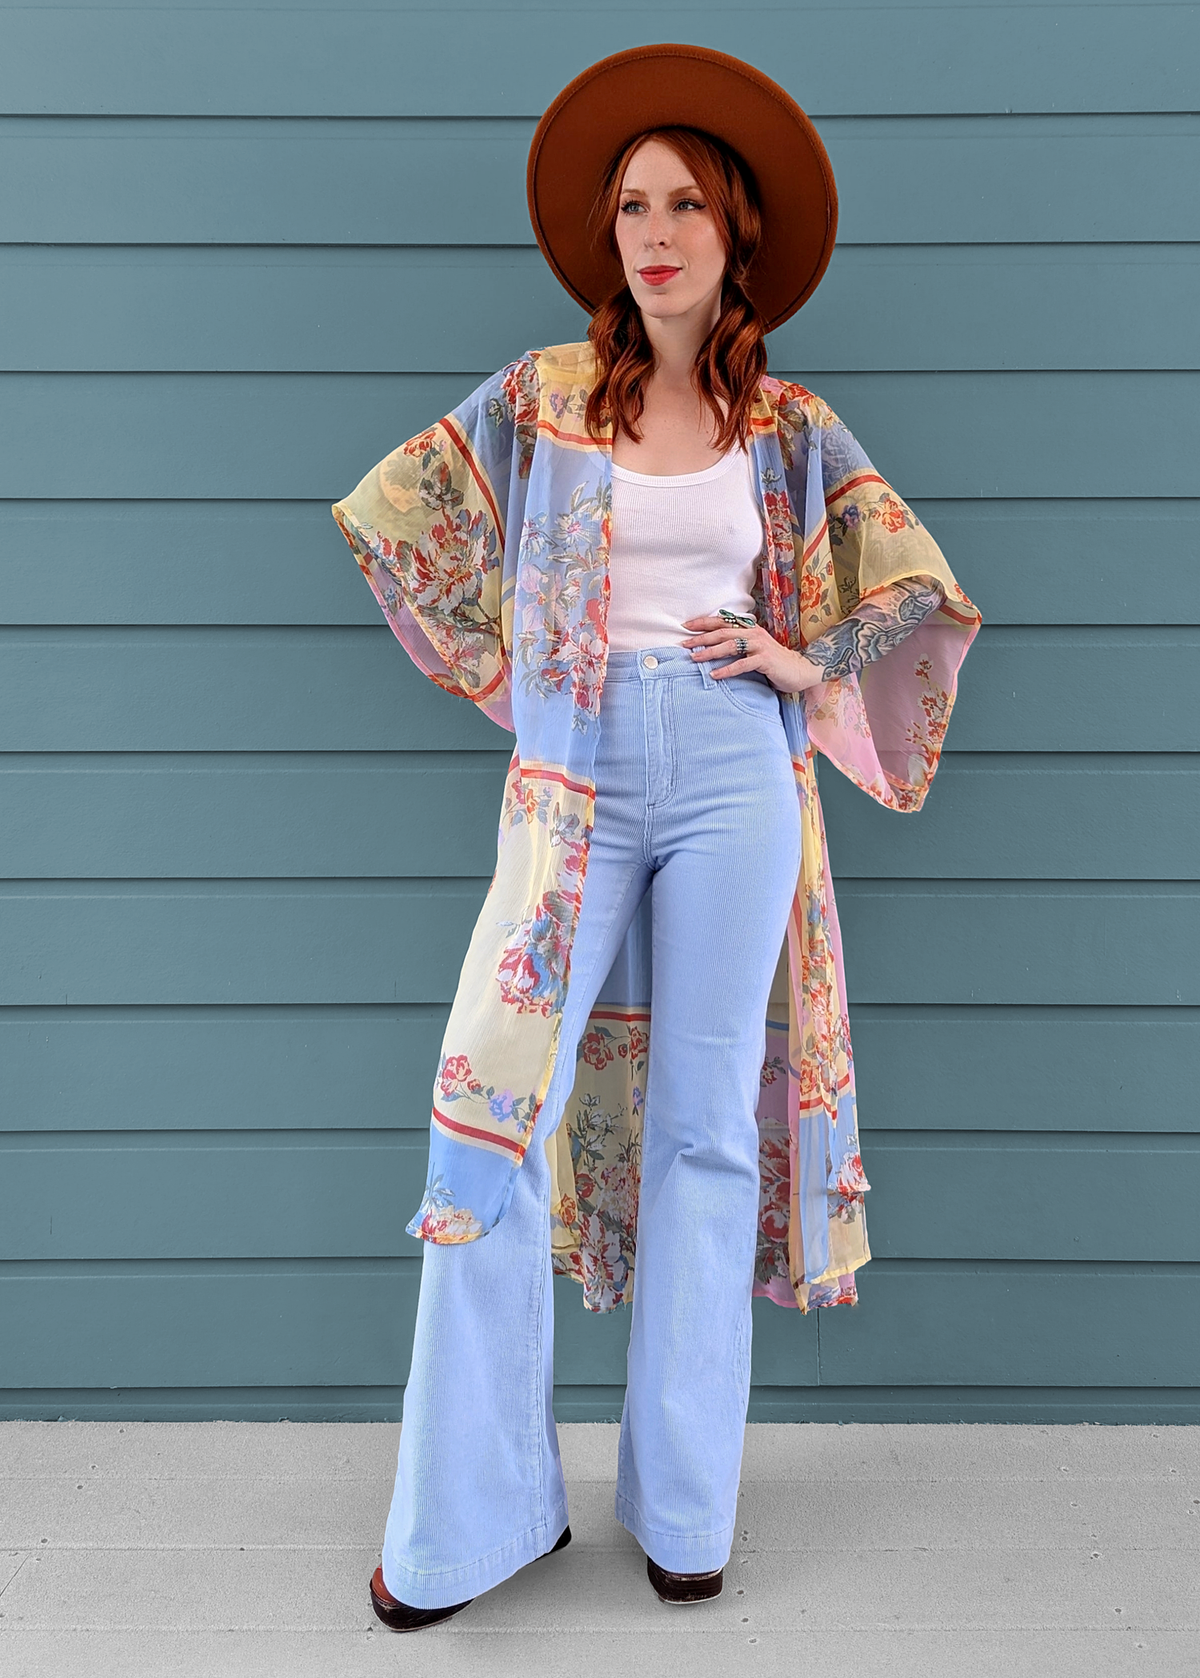 Rolla's Jeans Wisteria Blue Corduroy Flares. 70s inspired bell bottoms with a high rise waist, velvety thin wale corduroy, and a flare leg